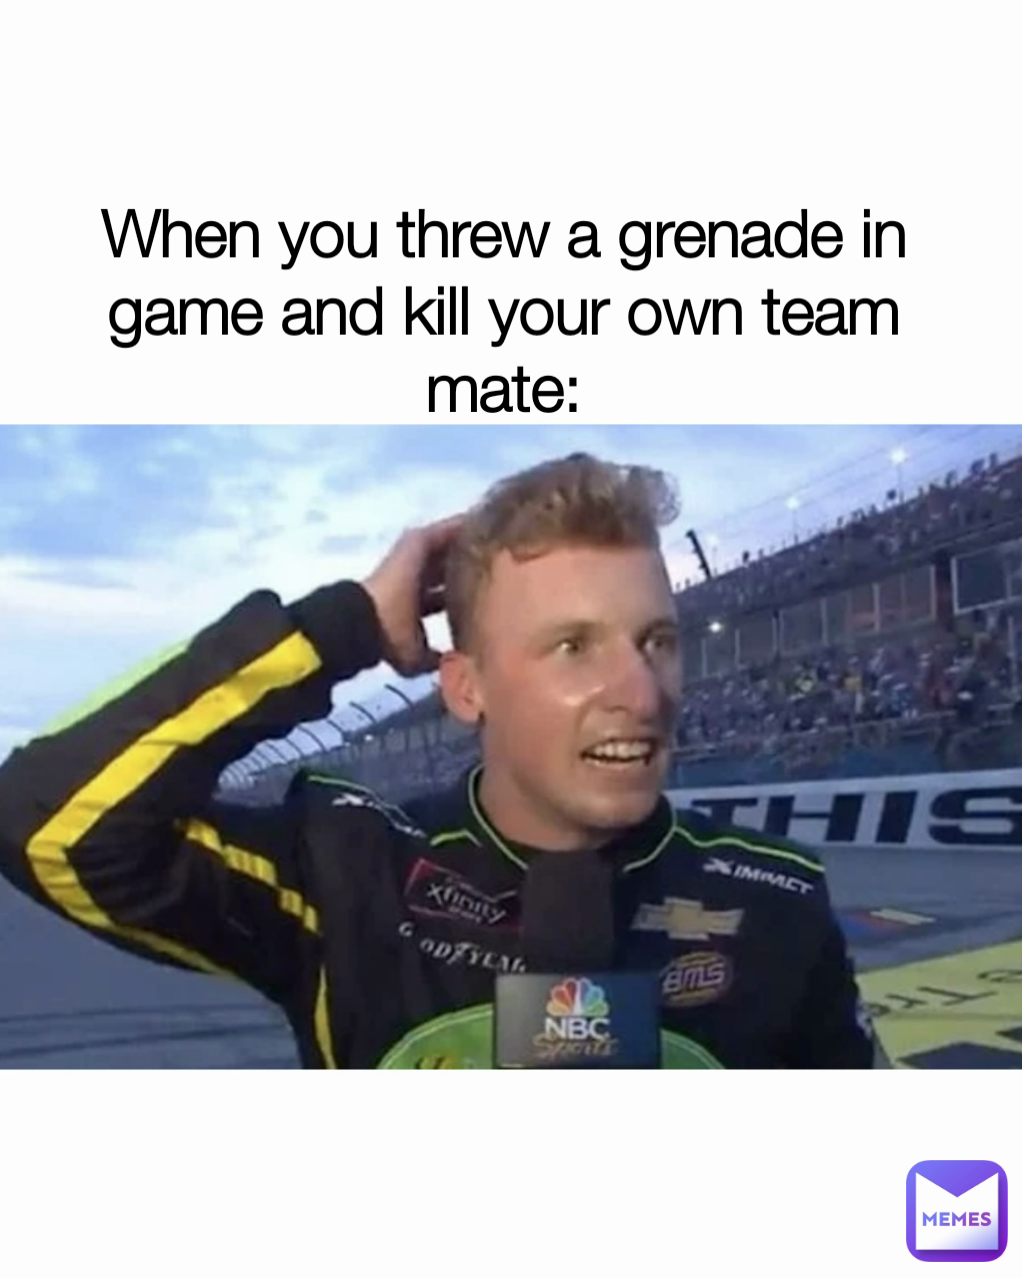 When you threw a grenade in game and kill your own team mate: